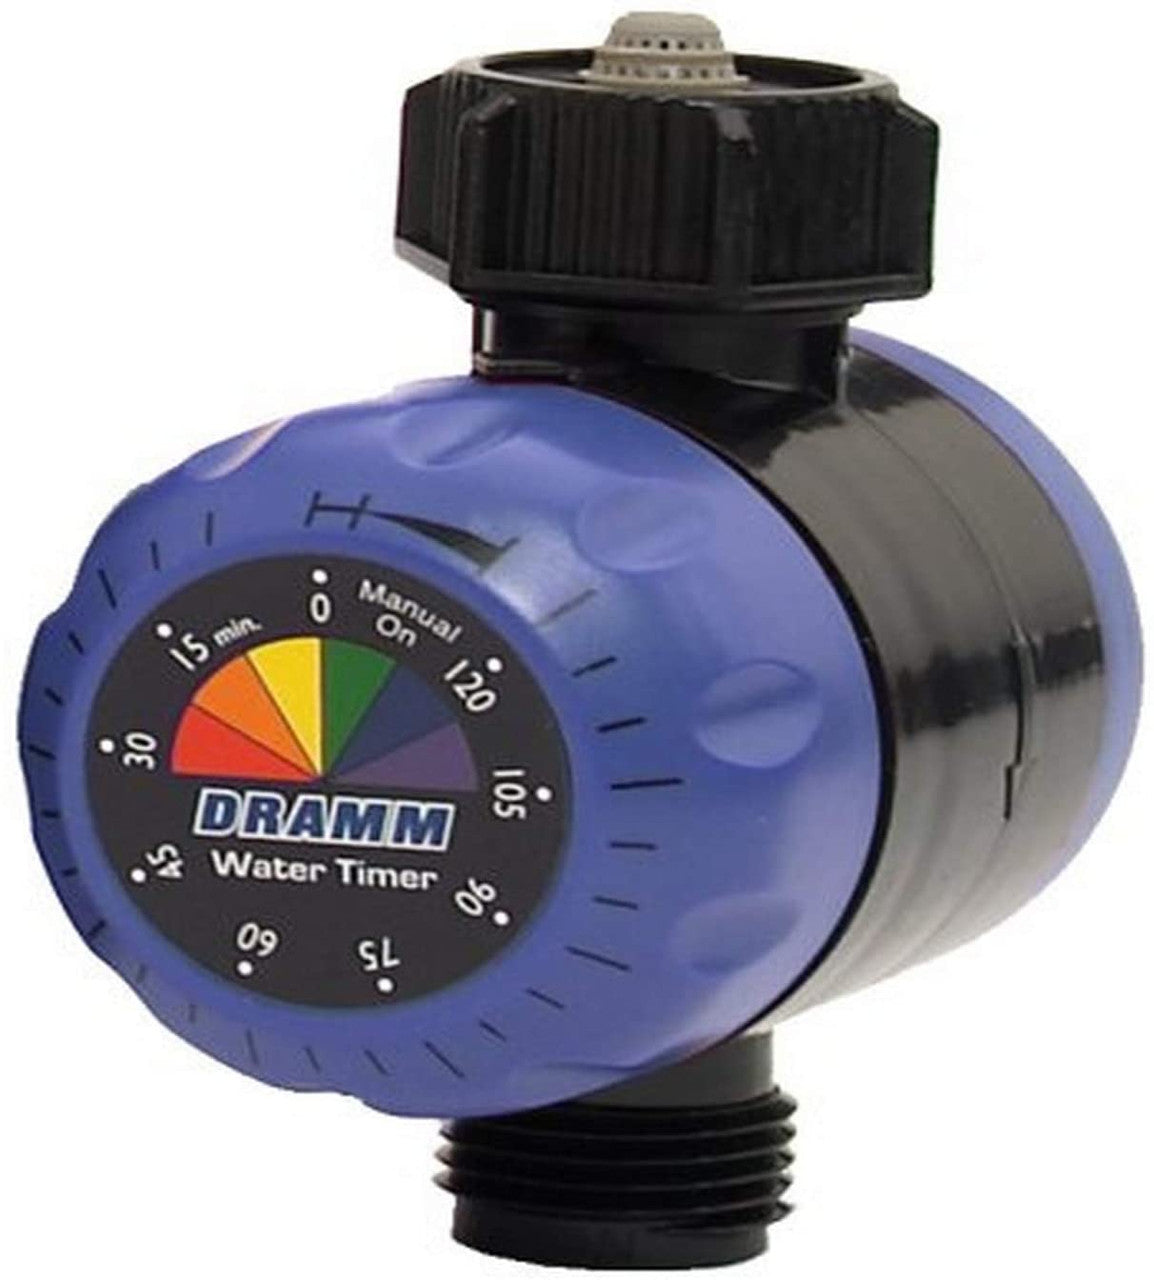 COLORSTORM Water Timer